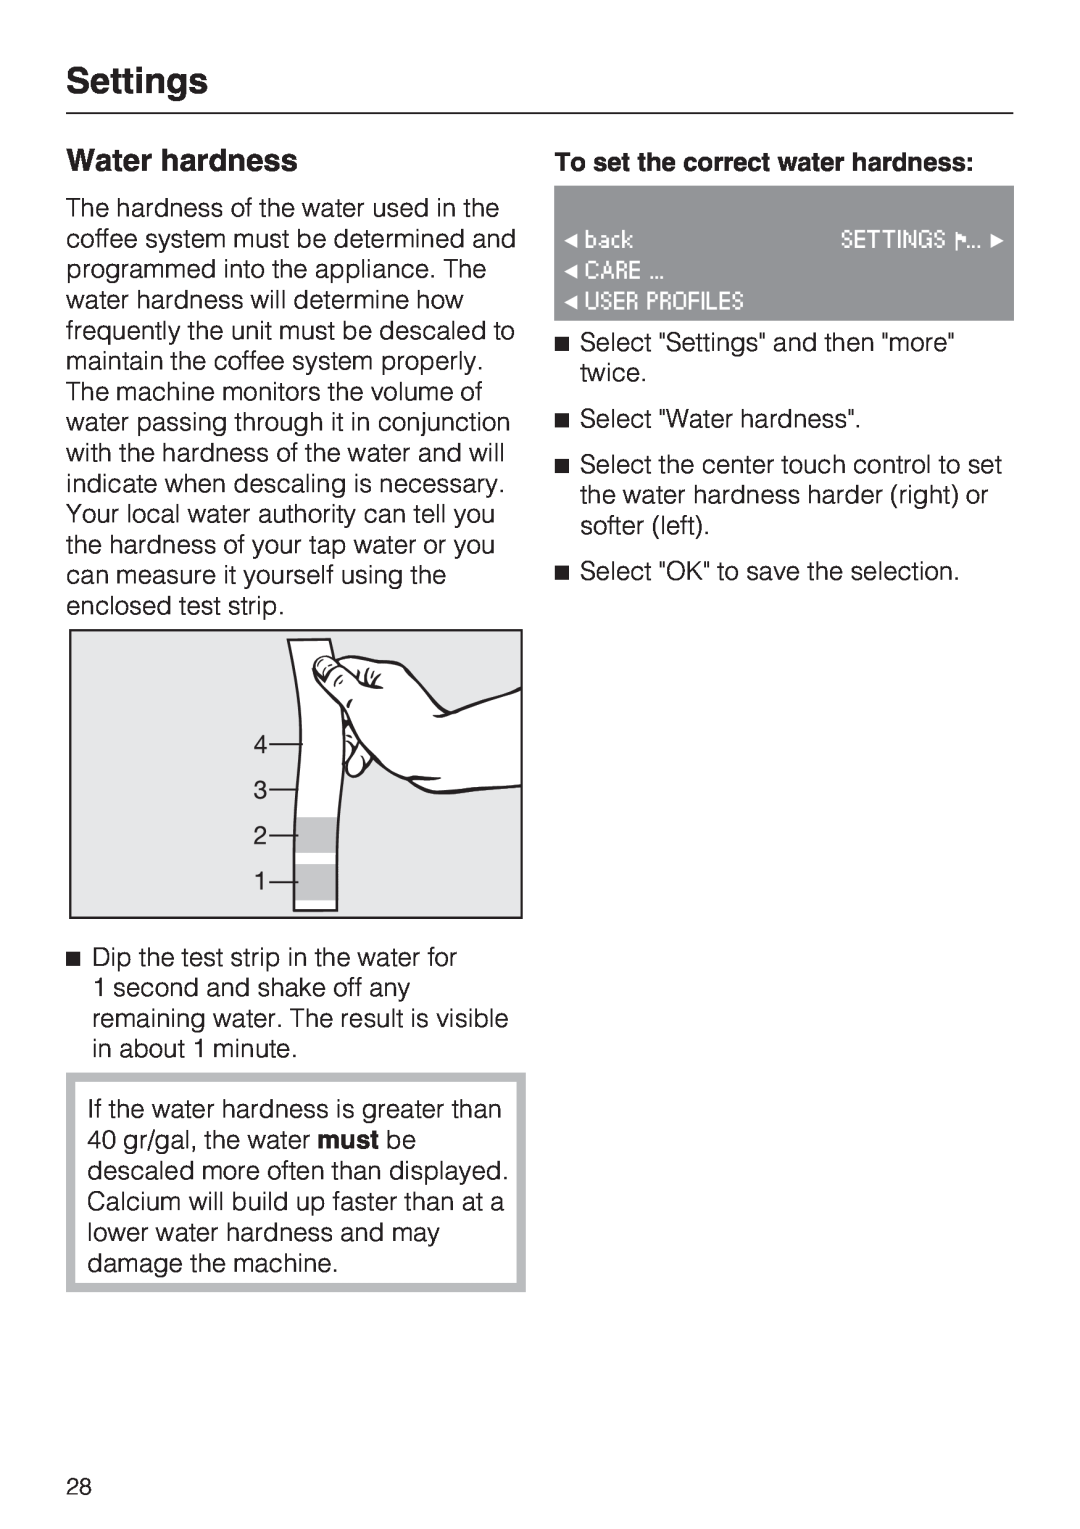 Miele CVA 4070 installation instructions Water hardness, To set the correct water hardness, Settings 